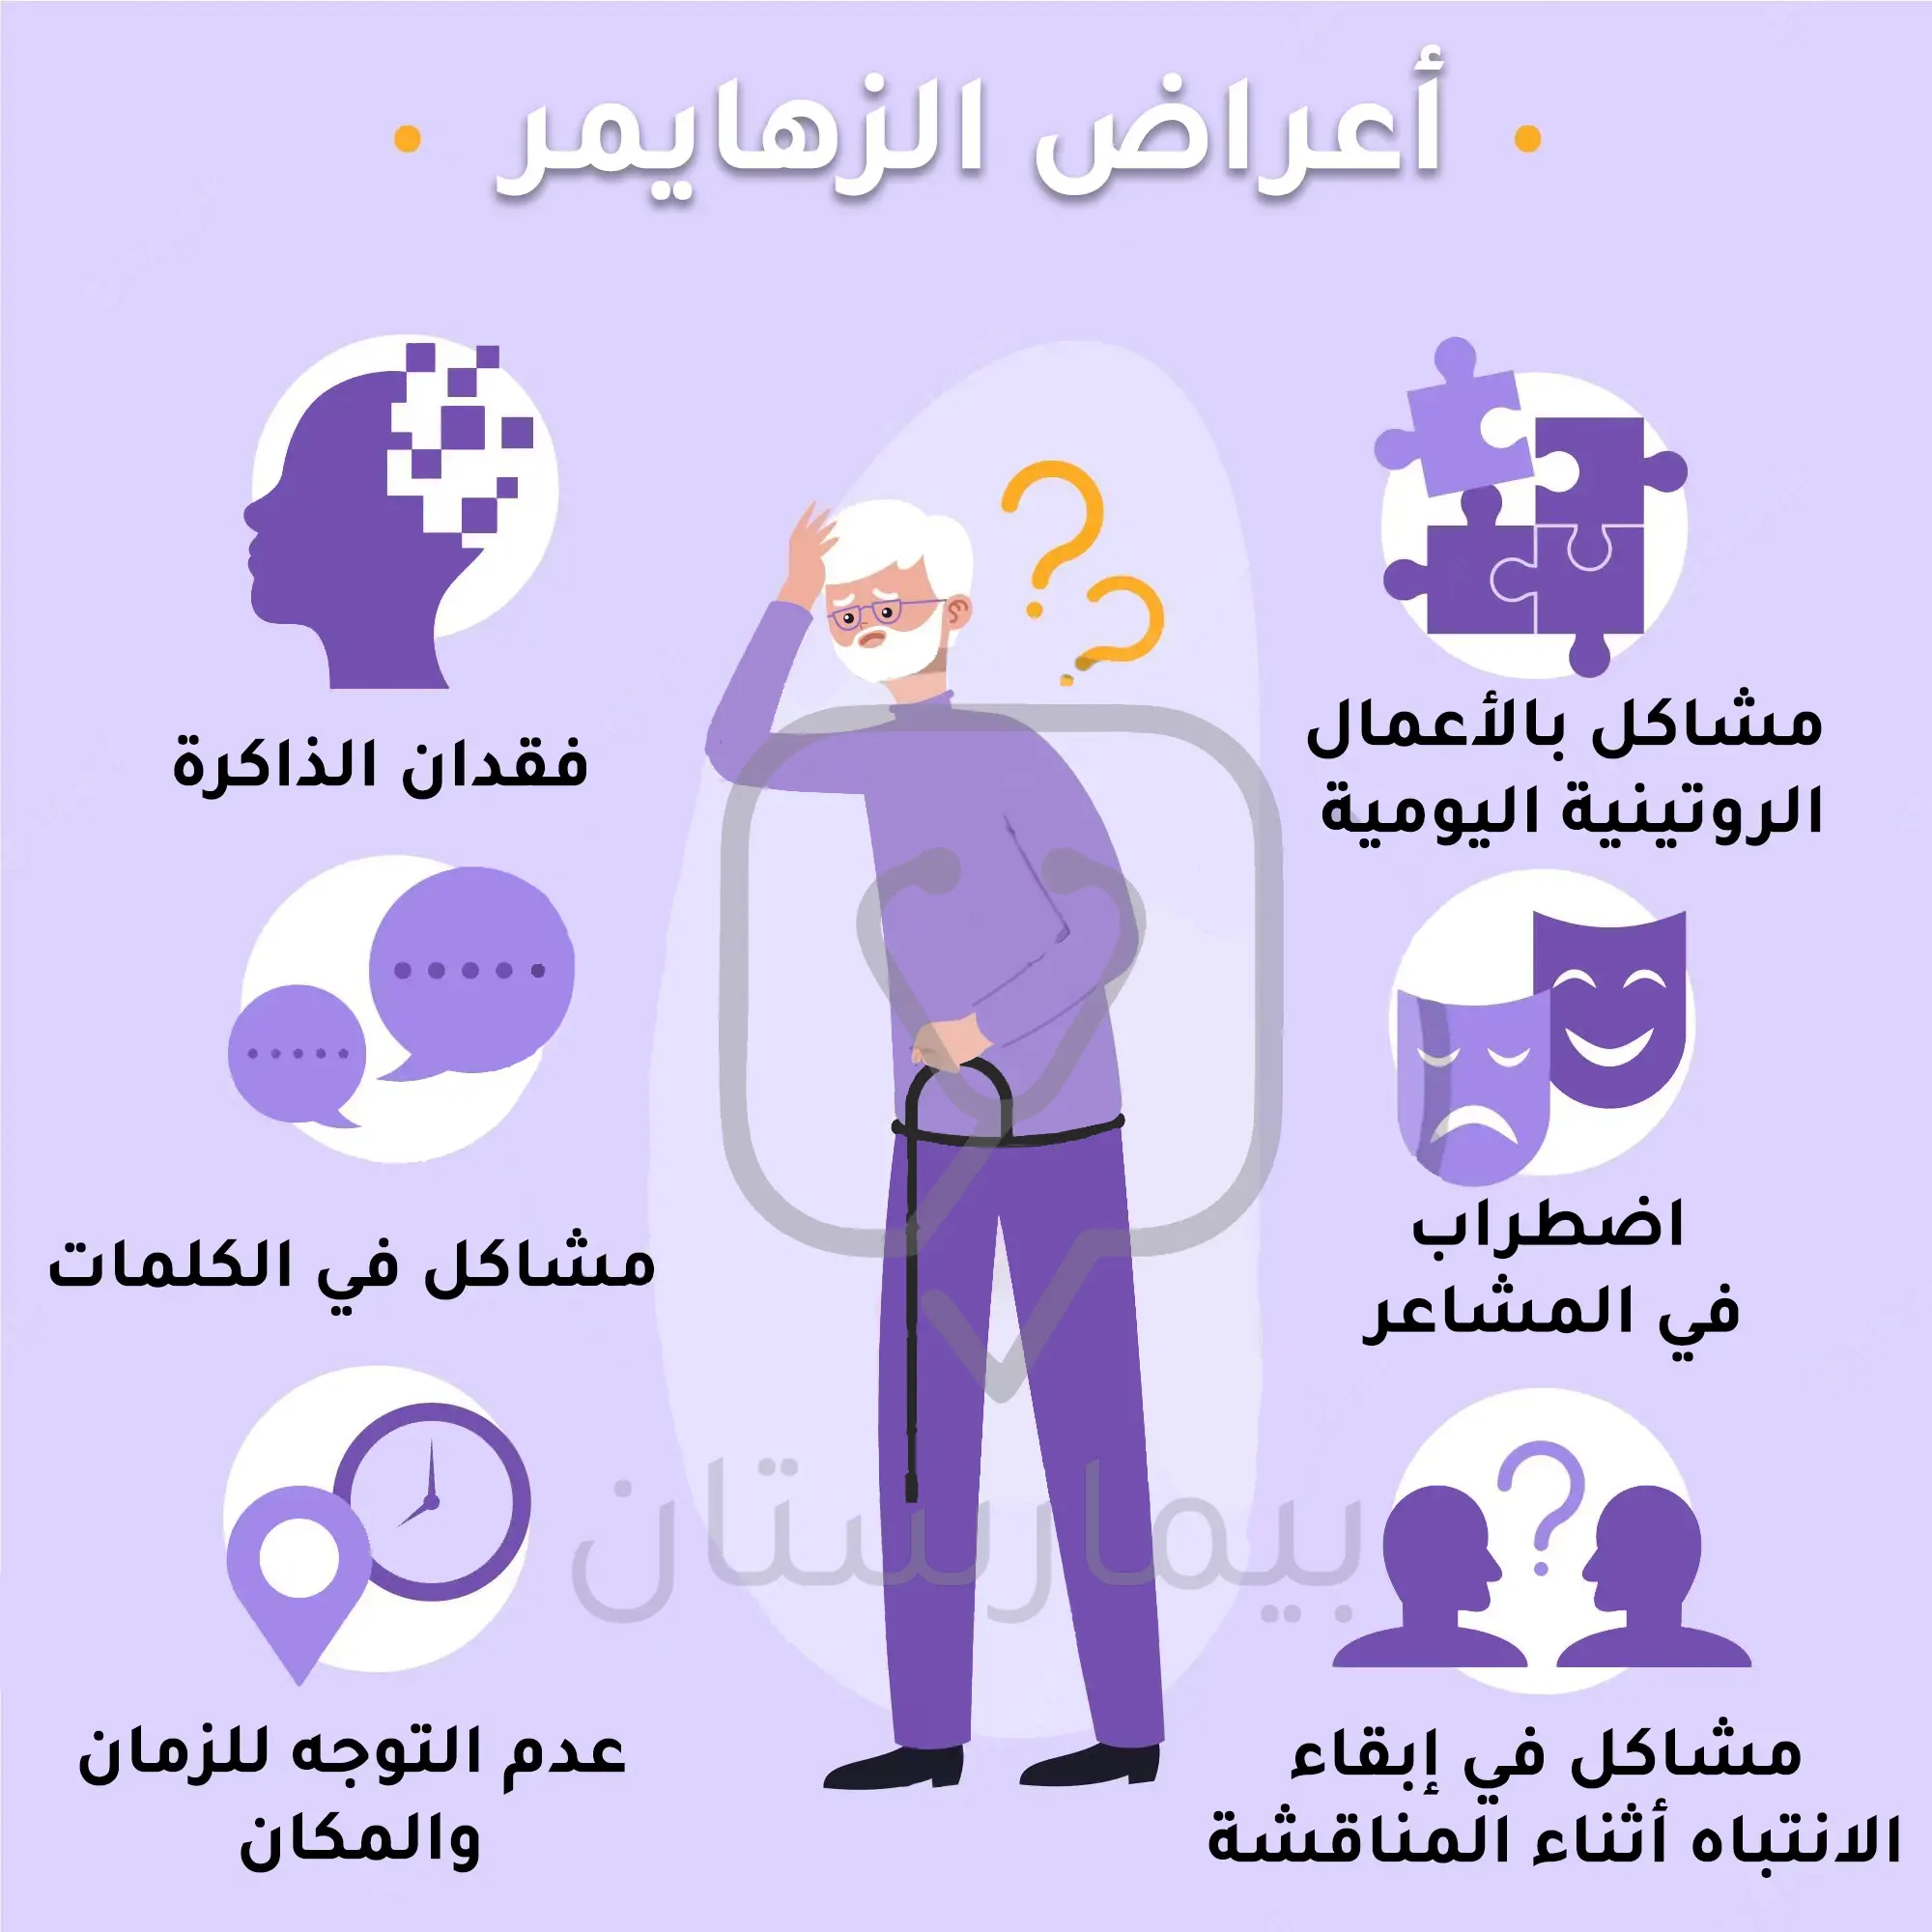 Image showing symptoms of Alzheimer's disease